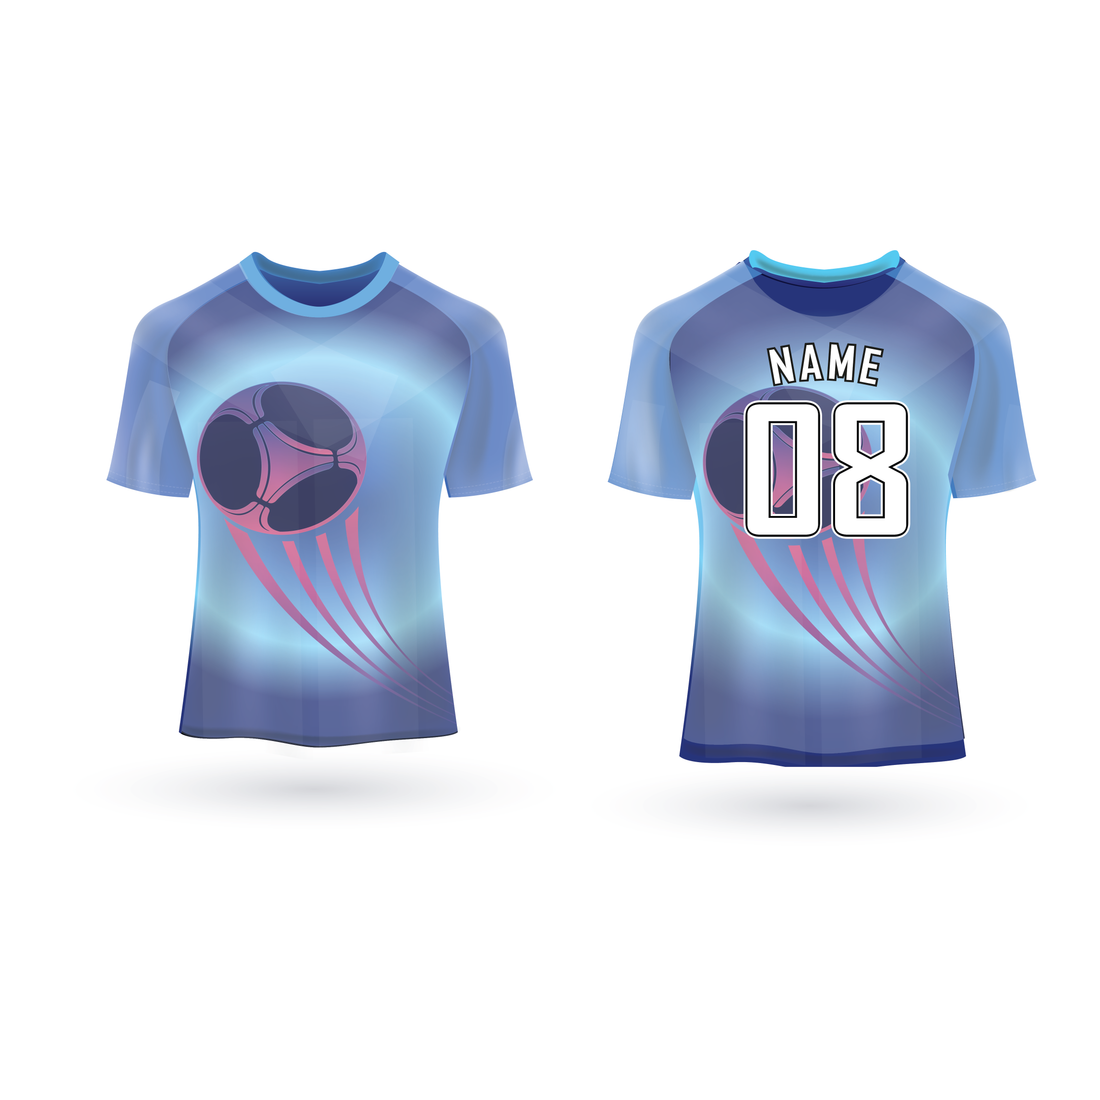 NEXT PRINT All Over Printed Customized Sublimation T-Shirt Unisex Sports Jersey Player Name & Number, Team Name NP50000285